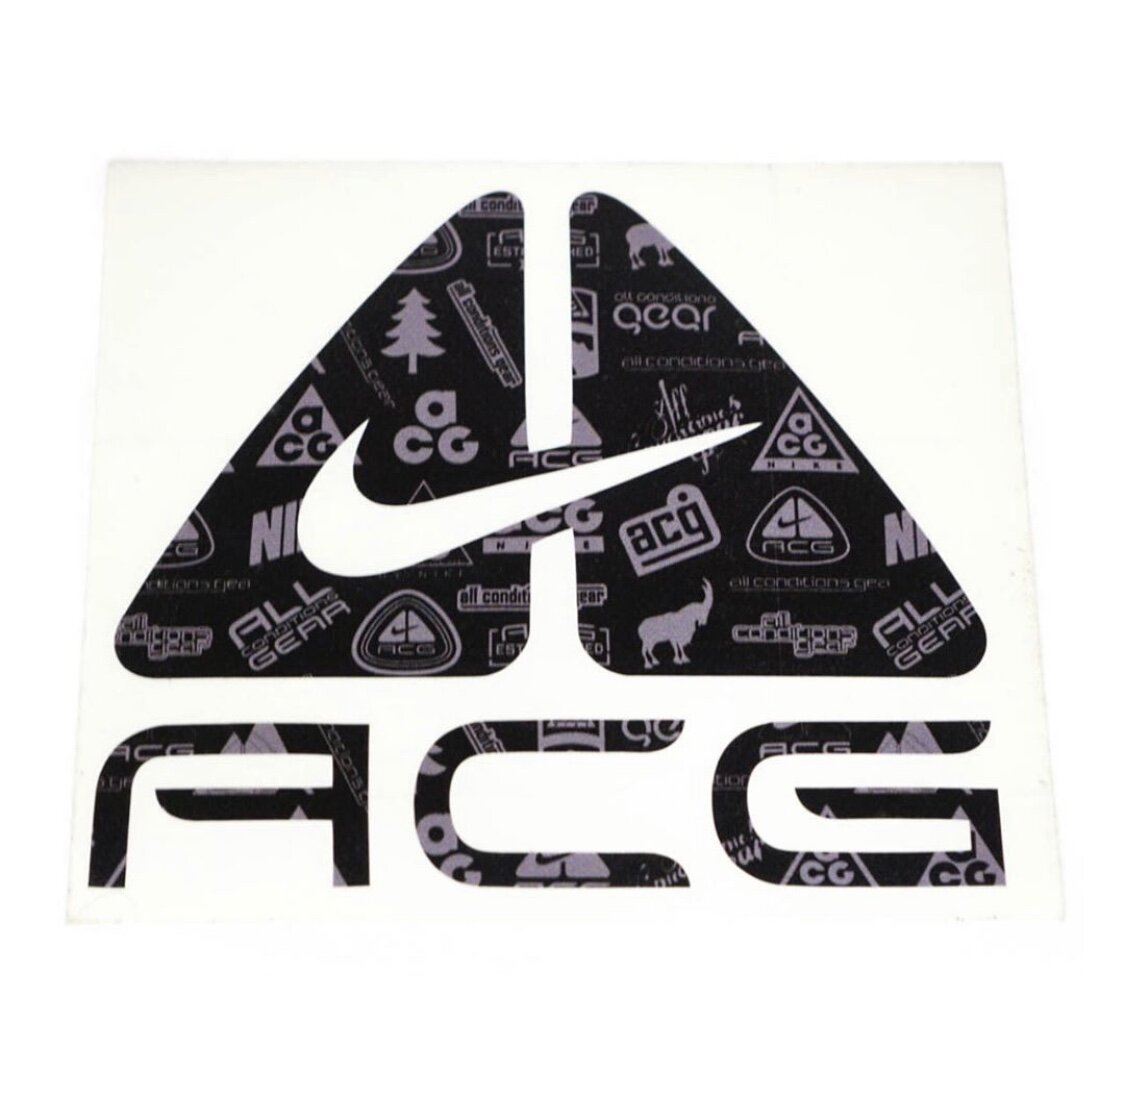 THe-History-Of-ACG-Story-ACG-ARCHIVE-Nike49.jpeg